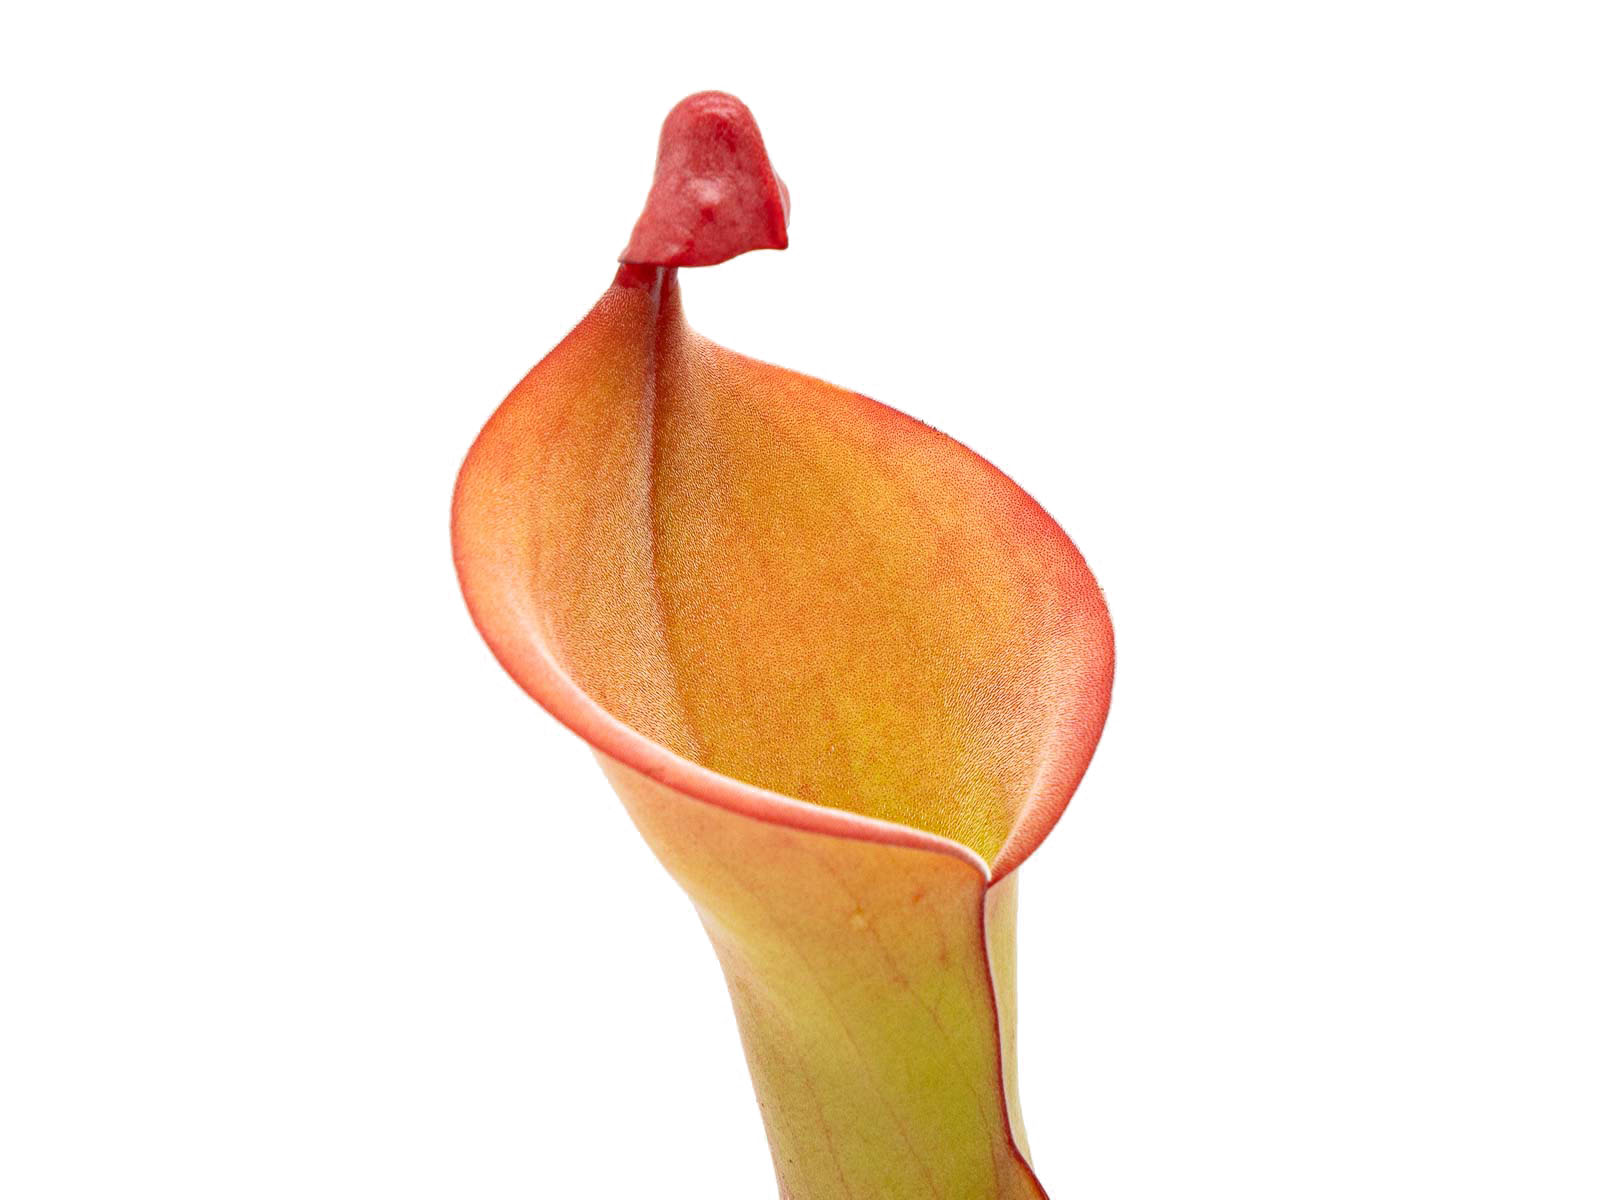 Heliamphora nutans - Giant, the original clone from Michael Schach